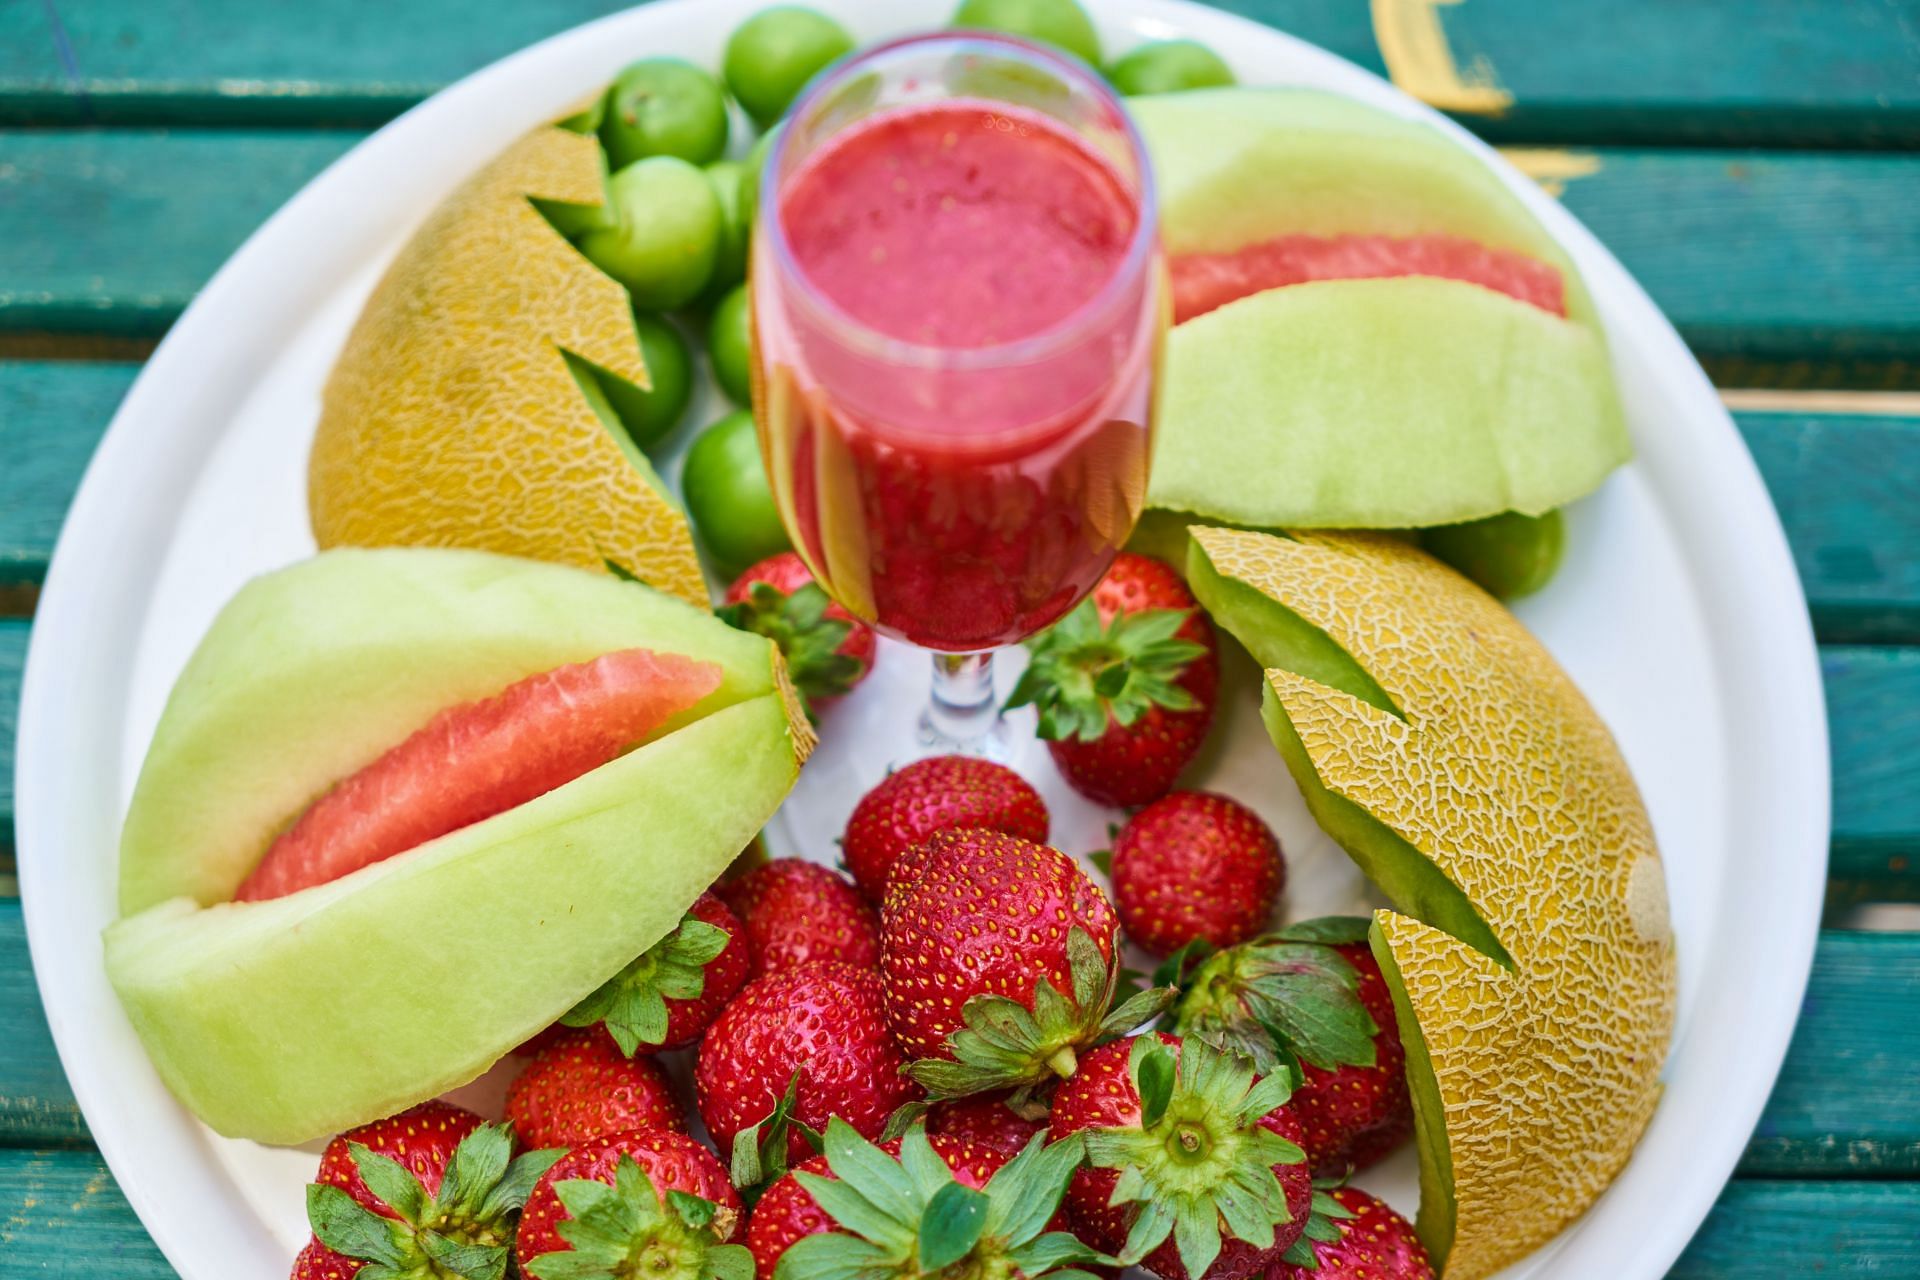 Fruit juice helps ease the symptoms of foodborne illness and prevent dehydration (Image via Pexels/Engin Akyurt)